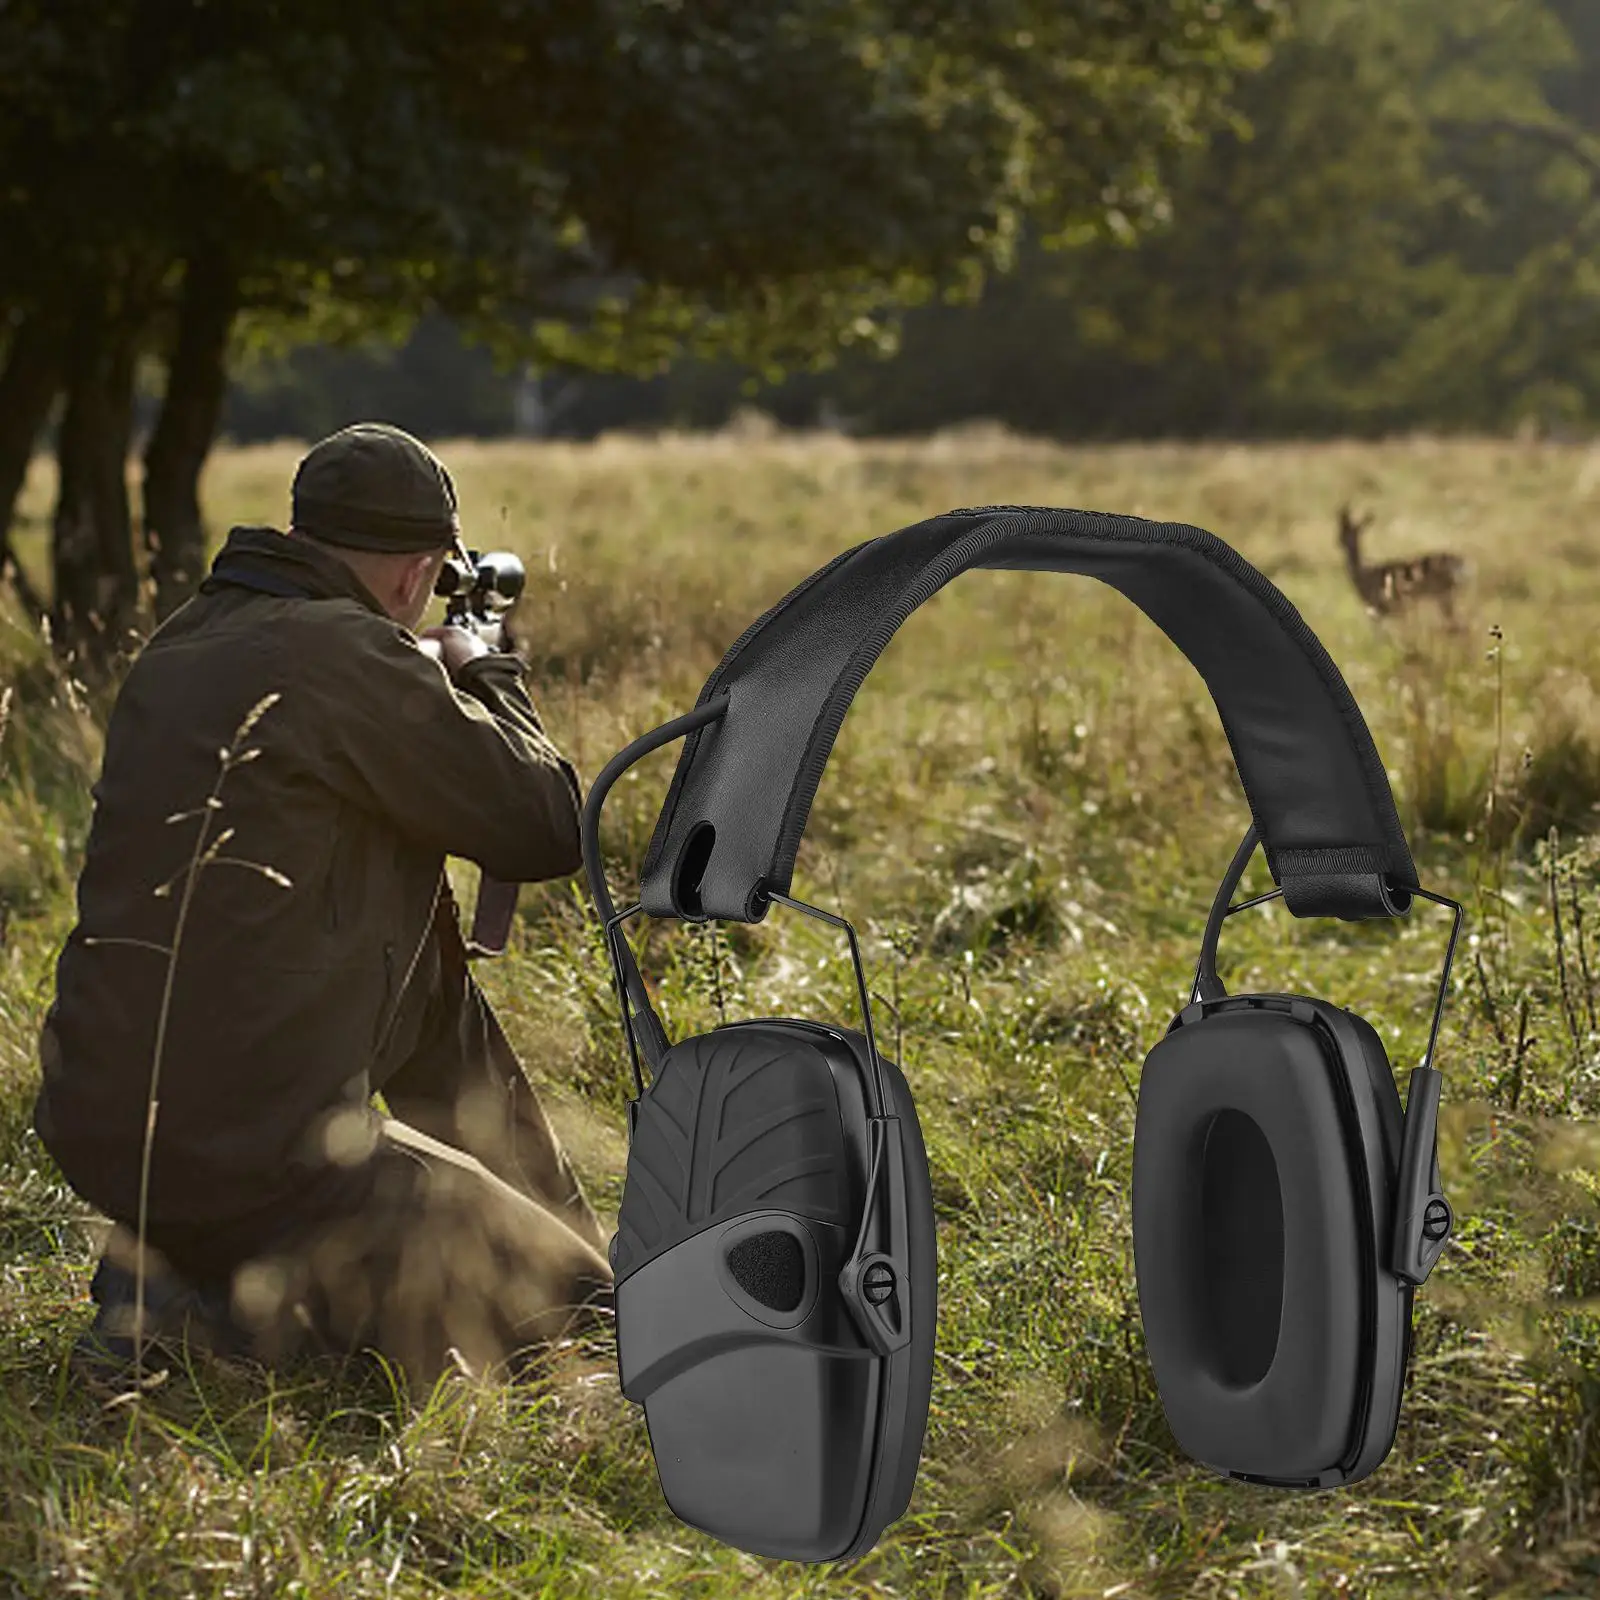 Hearing Protection Earmuff Folding Ear Protection Hearing Amplifiers Ear Plugs Protective Headset for Gameing Mowing Shooting